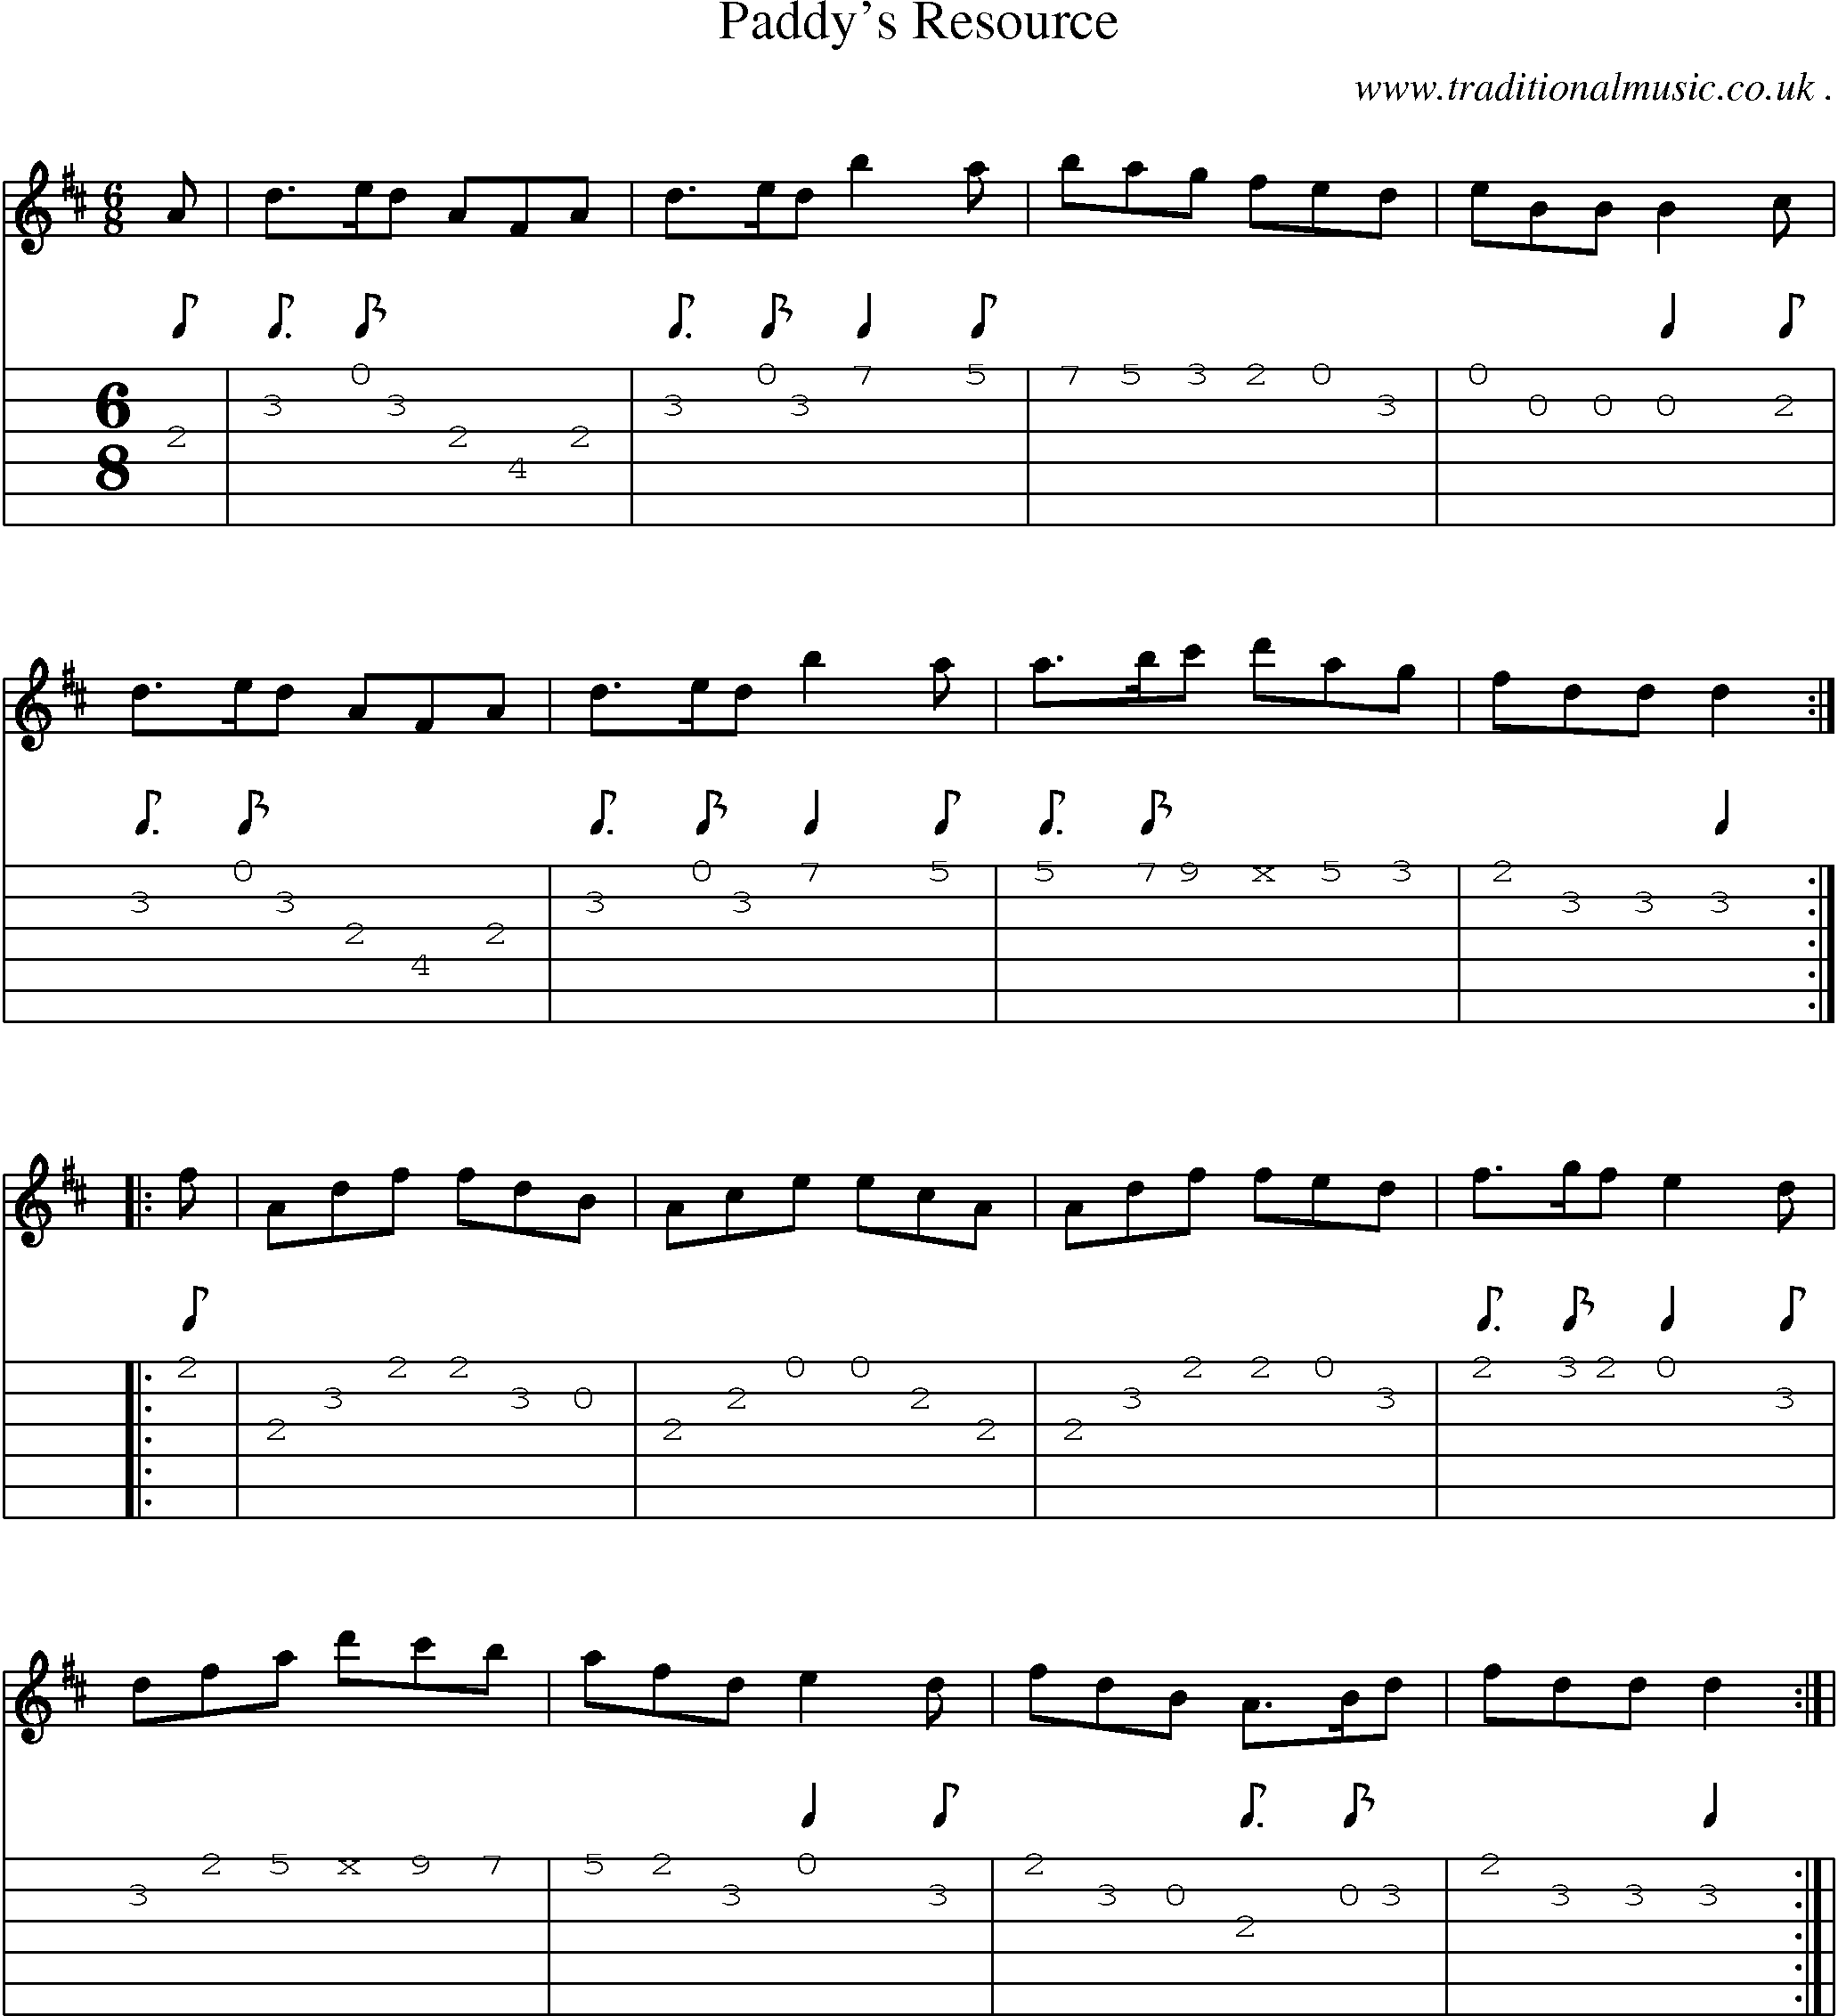 Sheet-Music and Guitar Tabs for Paddys Resource